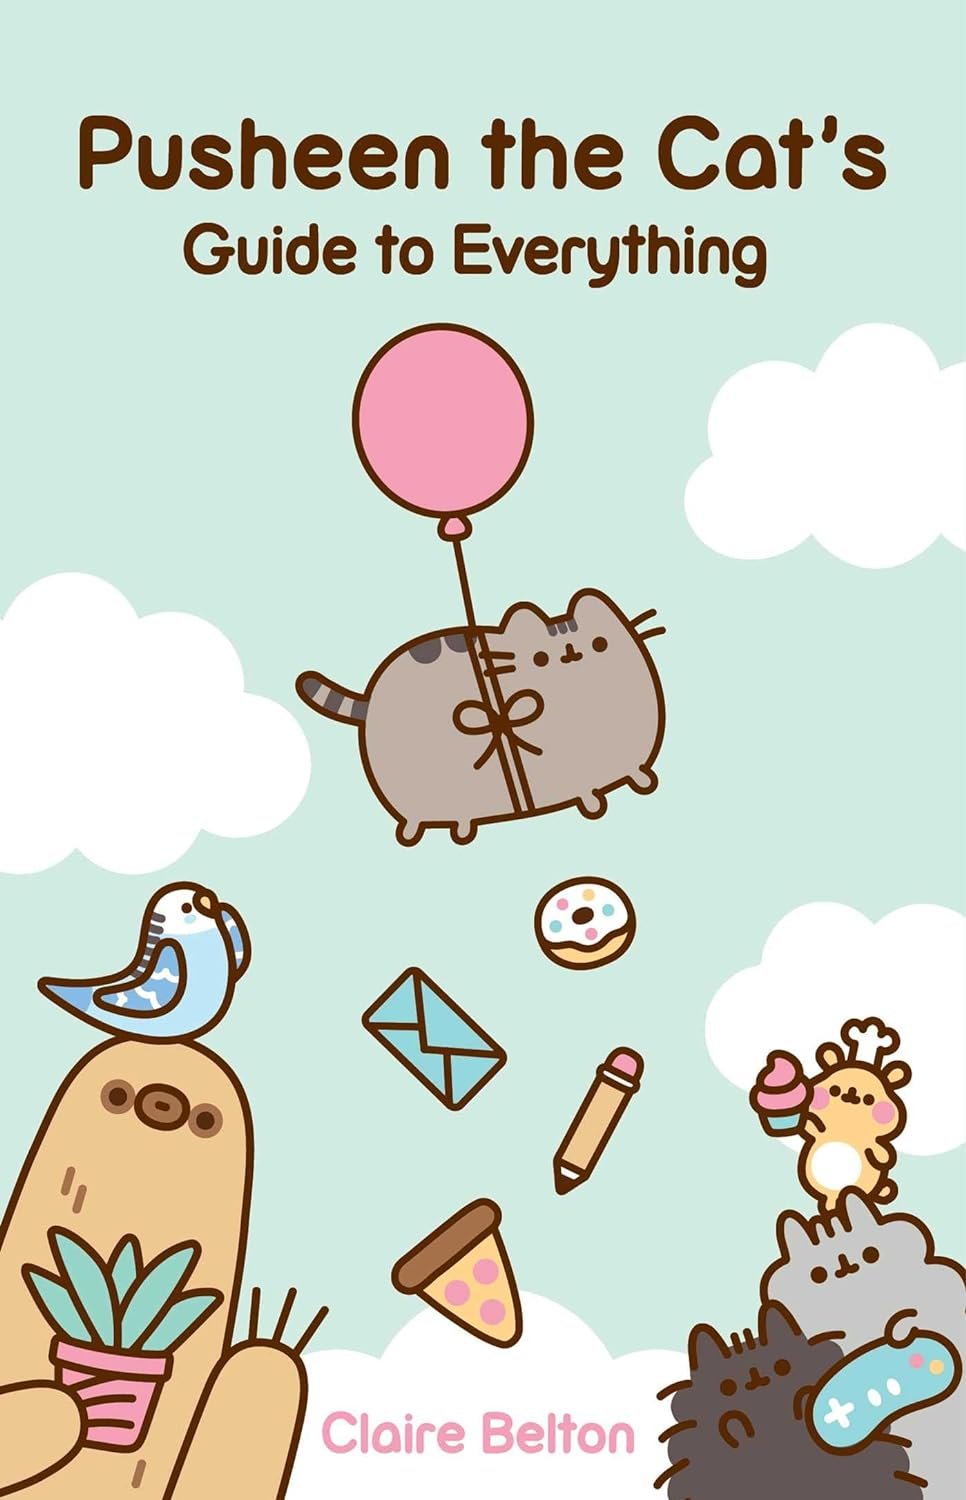 Whether you're looking for a guide to being lazy or how to tell if your cat is a Vampurr, Pusheen's got you covered in this collection of too-cute comics, expert advice, and silly antics.